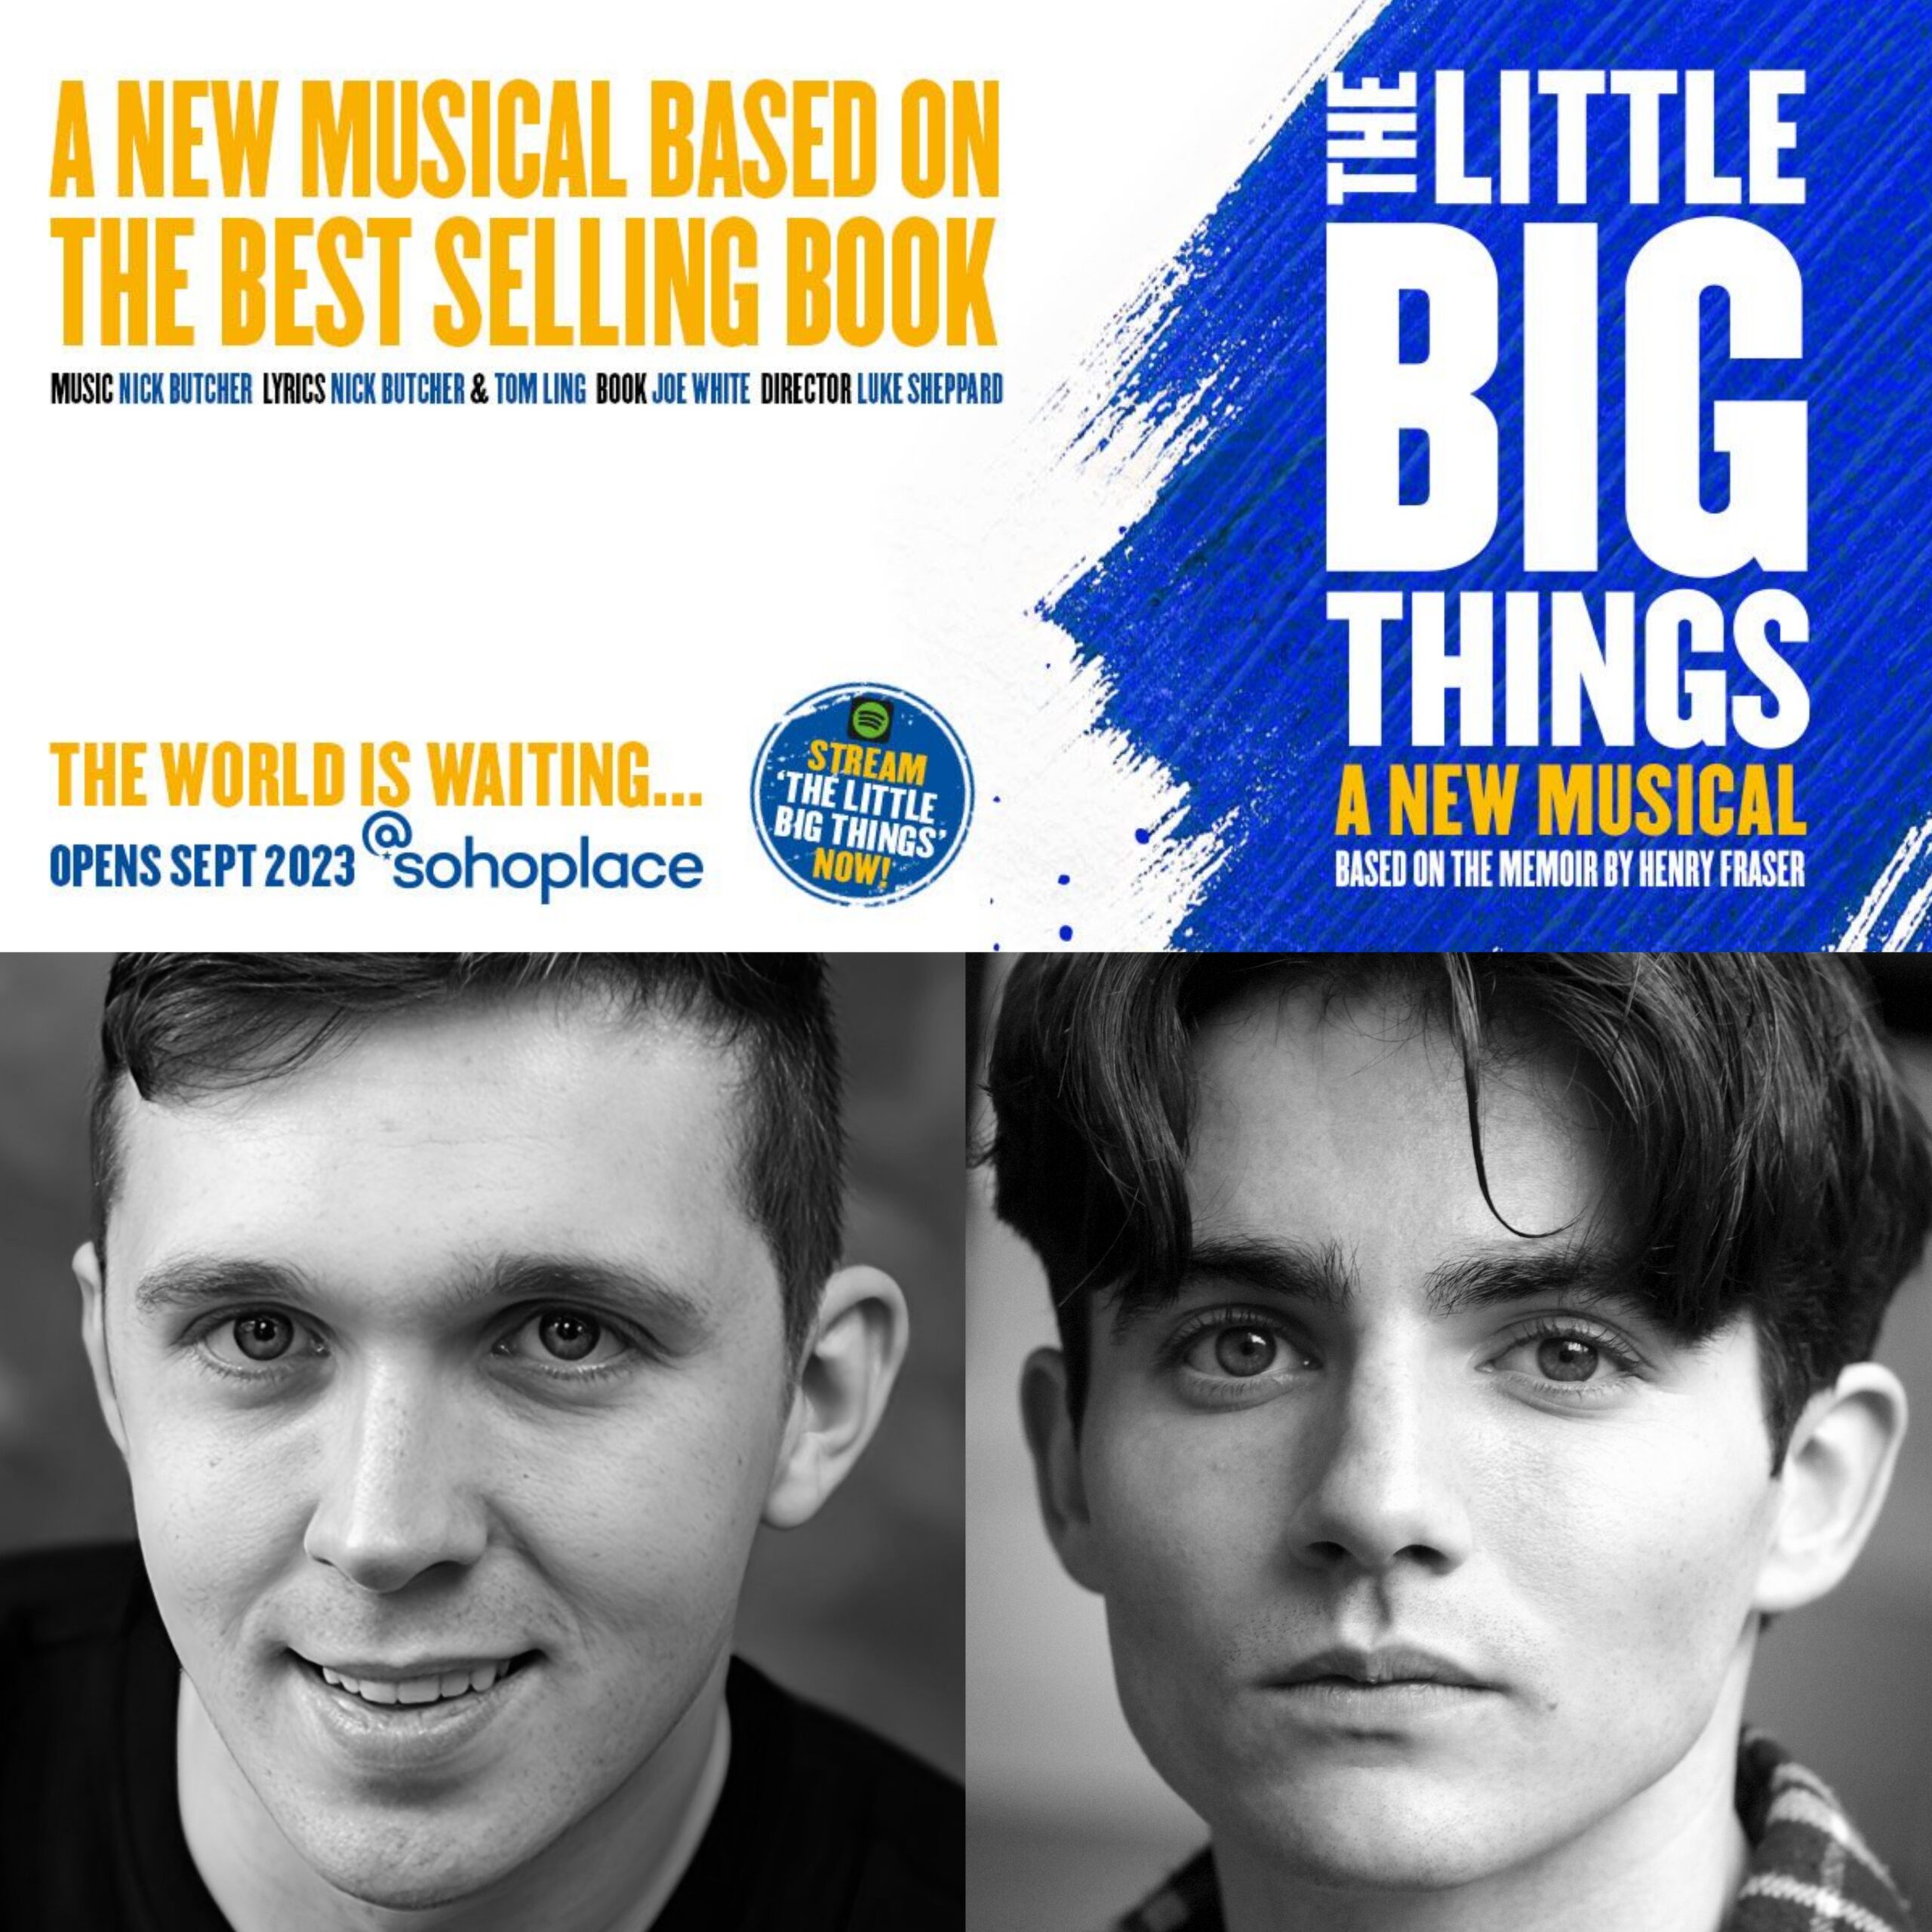 THE LITTLE BIG THINGS A NEW MUSICAL WORLD PREMIERE ANNOUNCED FOR